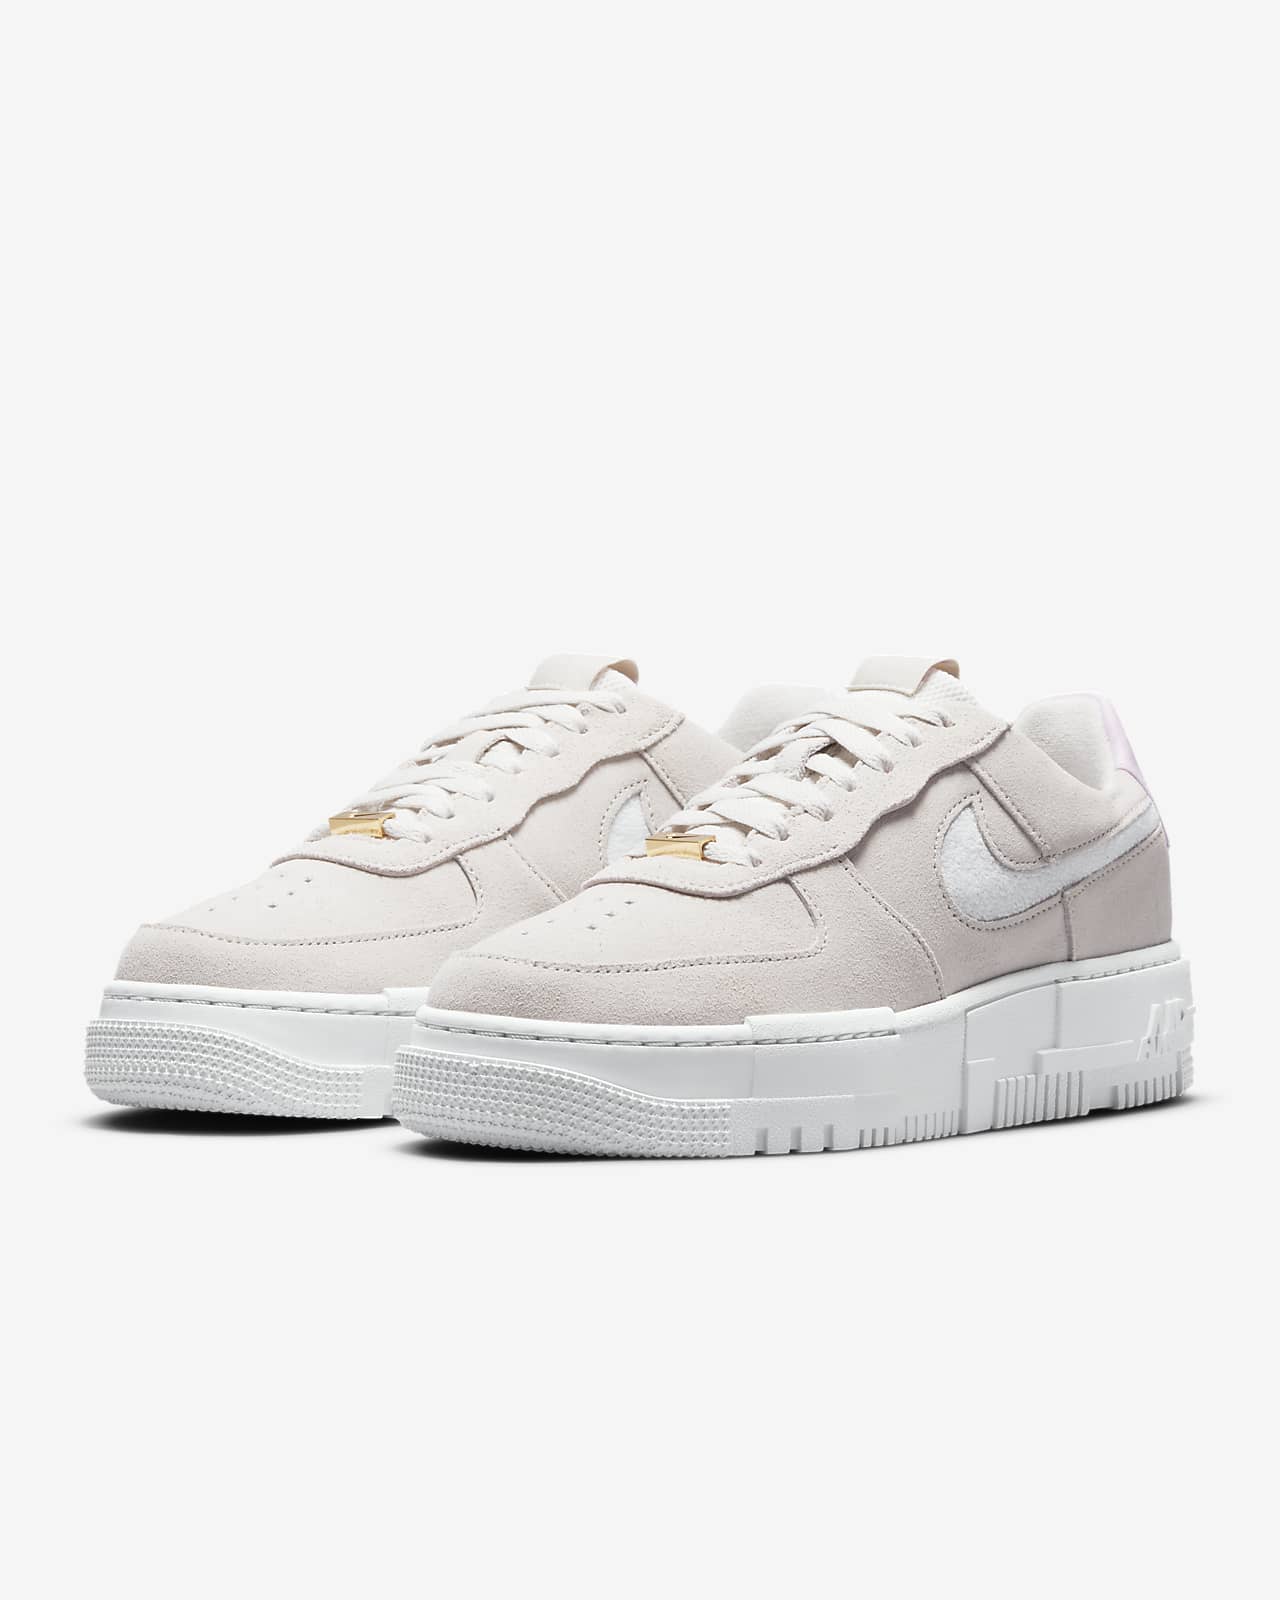 Women's Air Force 1 Pixel 'White' Release Date. Nike SNKRS